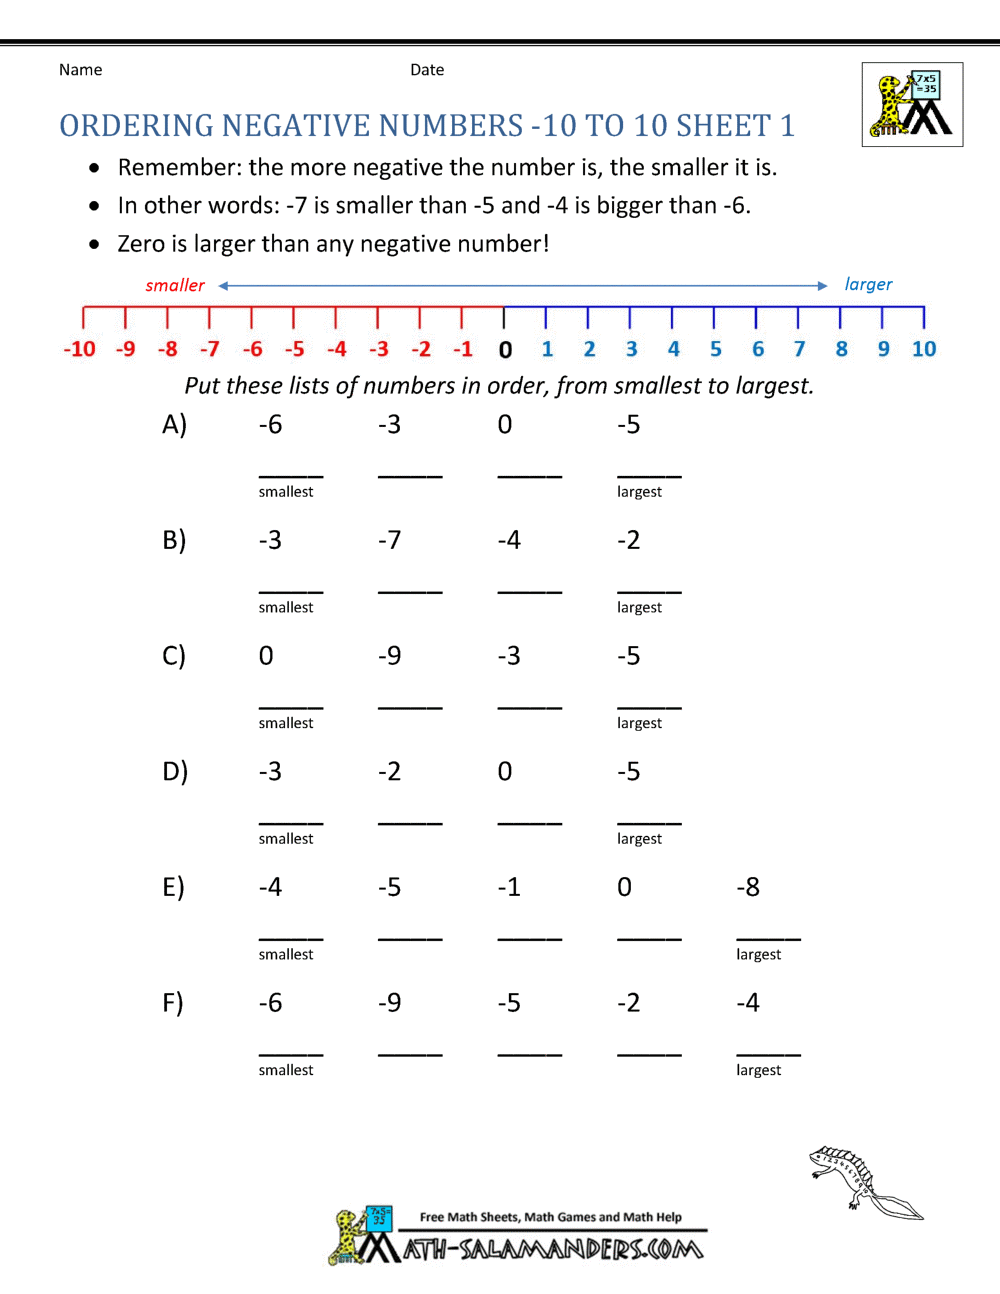 ordering-negative-numbers-from-10-to-10